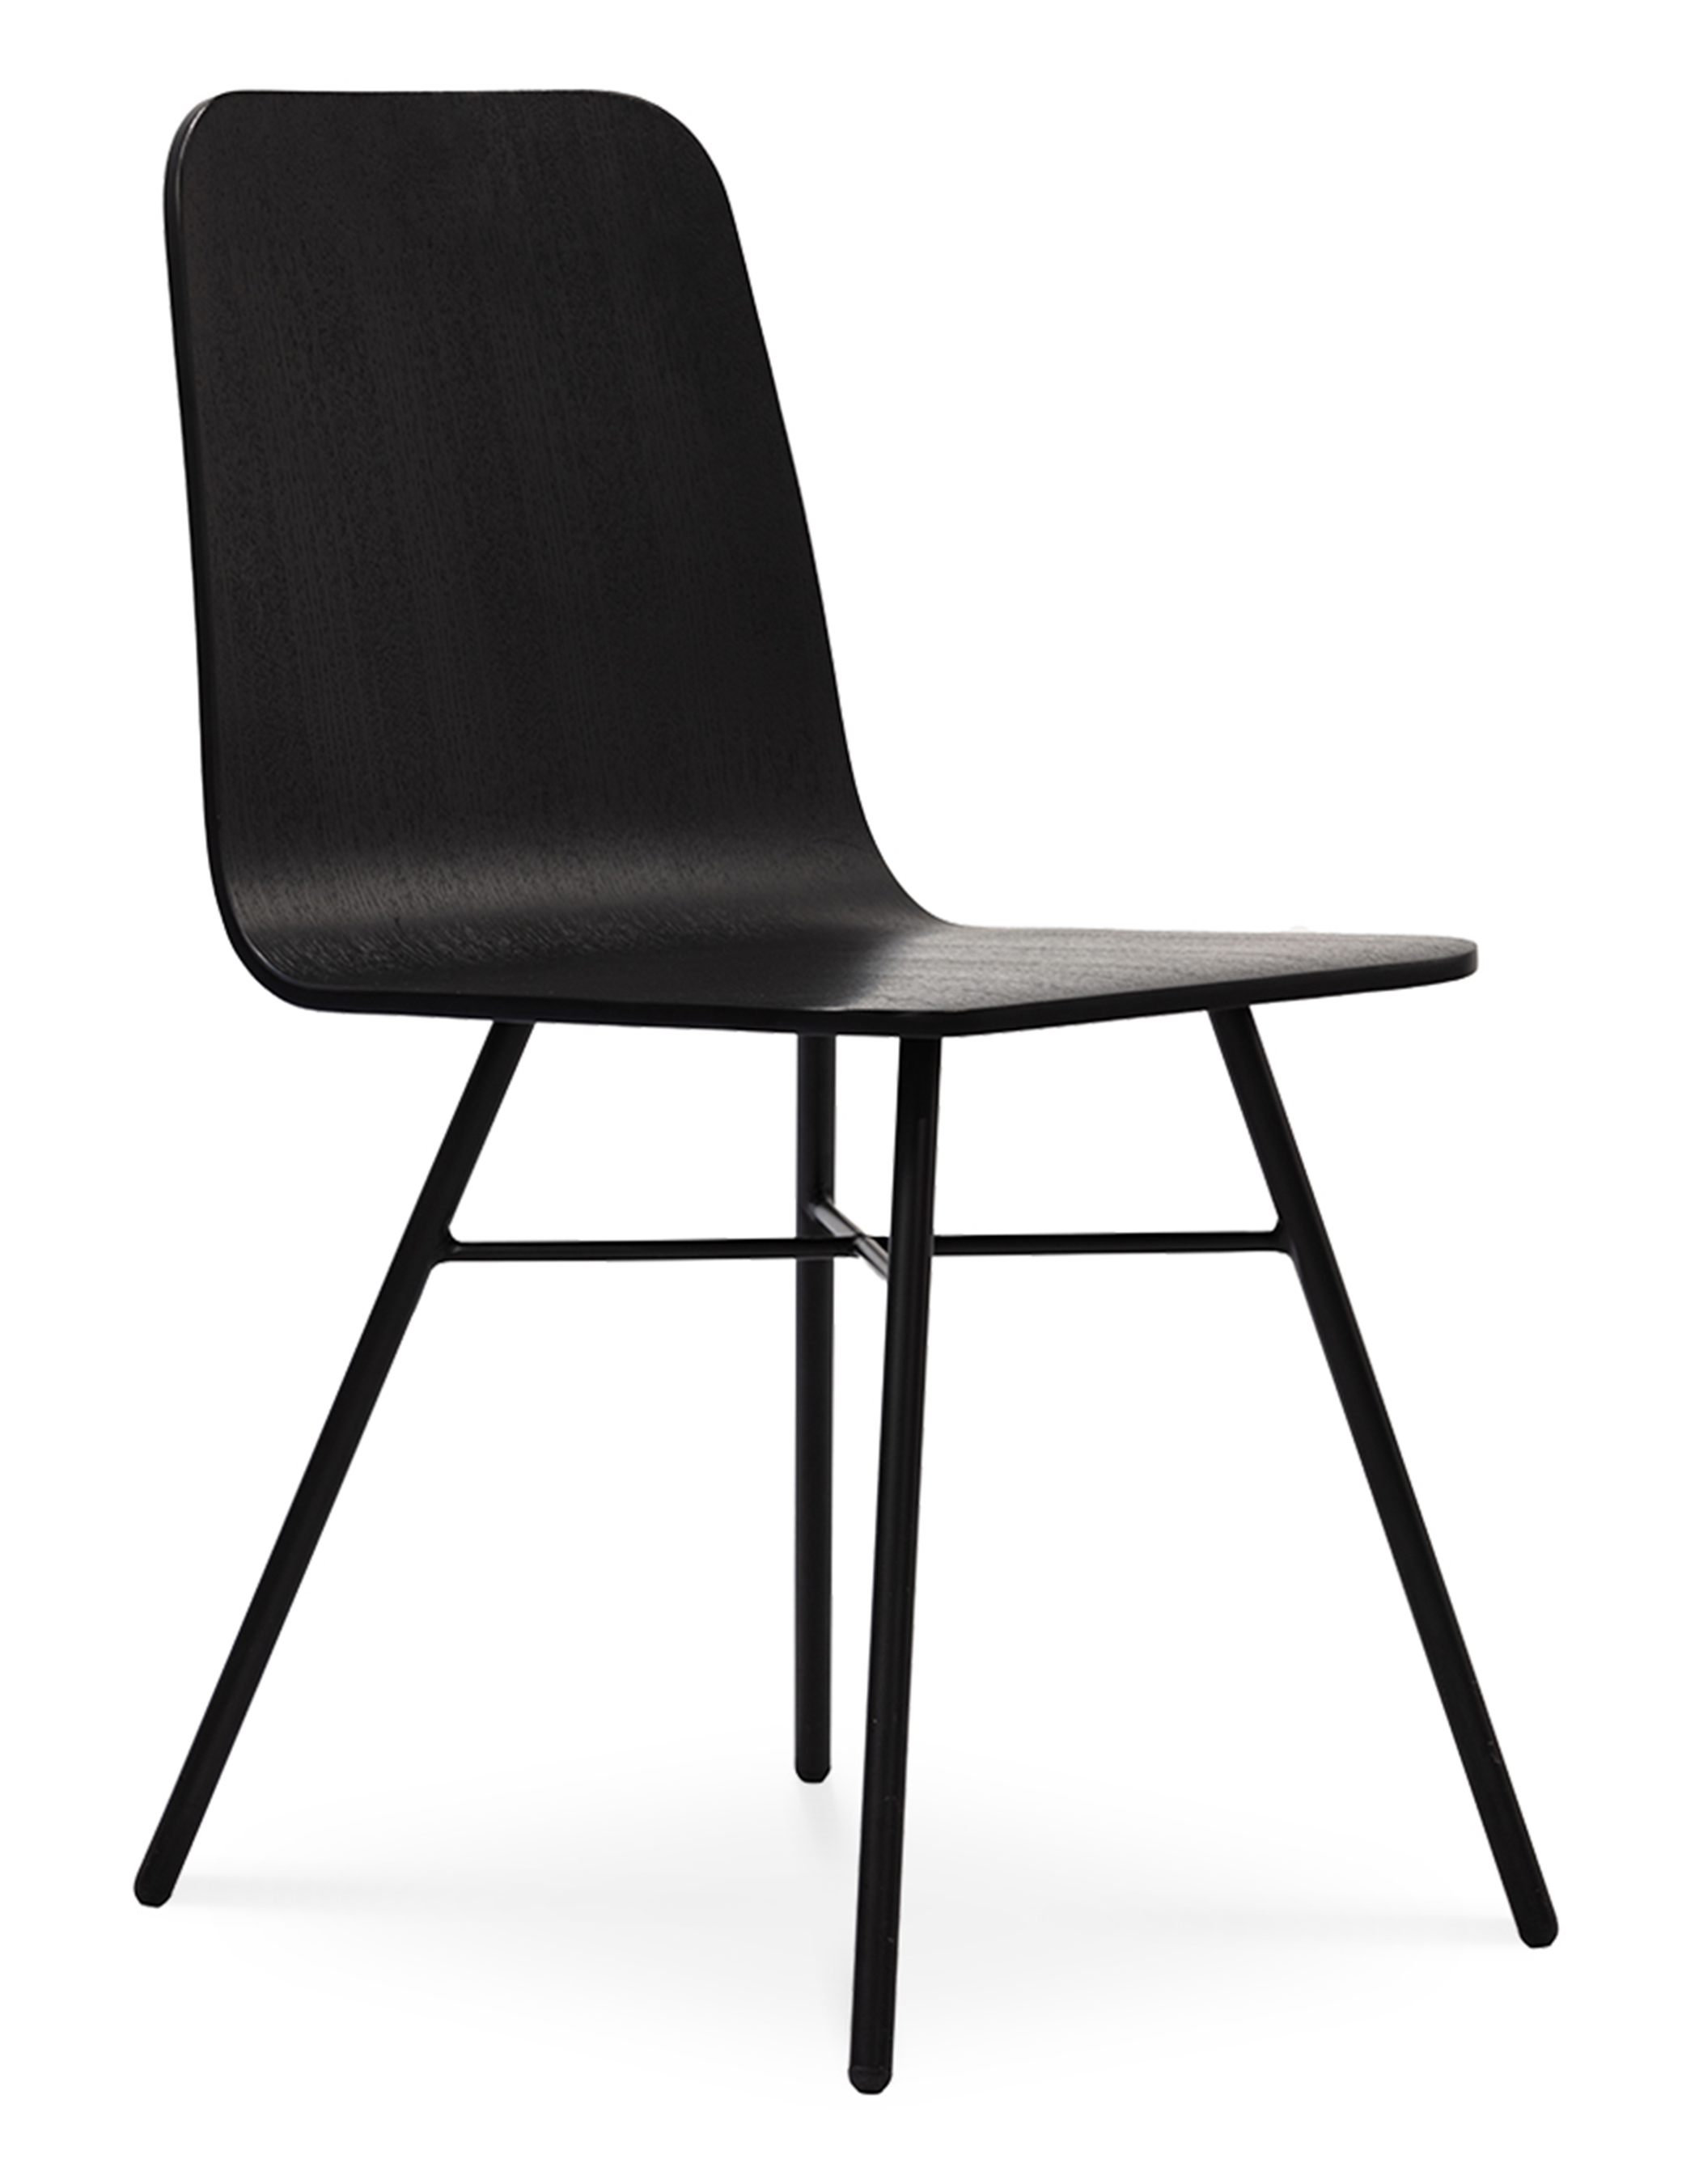 WS - Lolli chair - Black ash (Front angle)